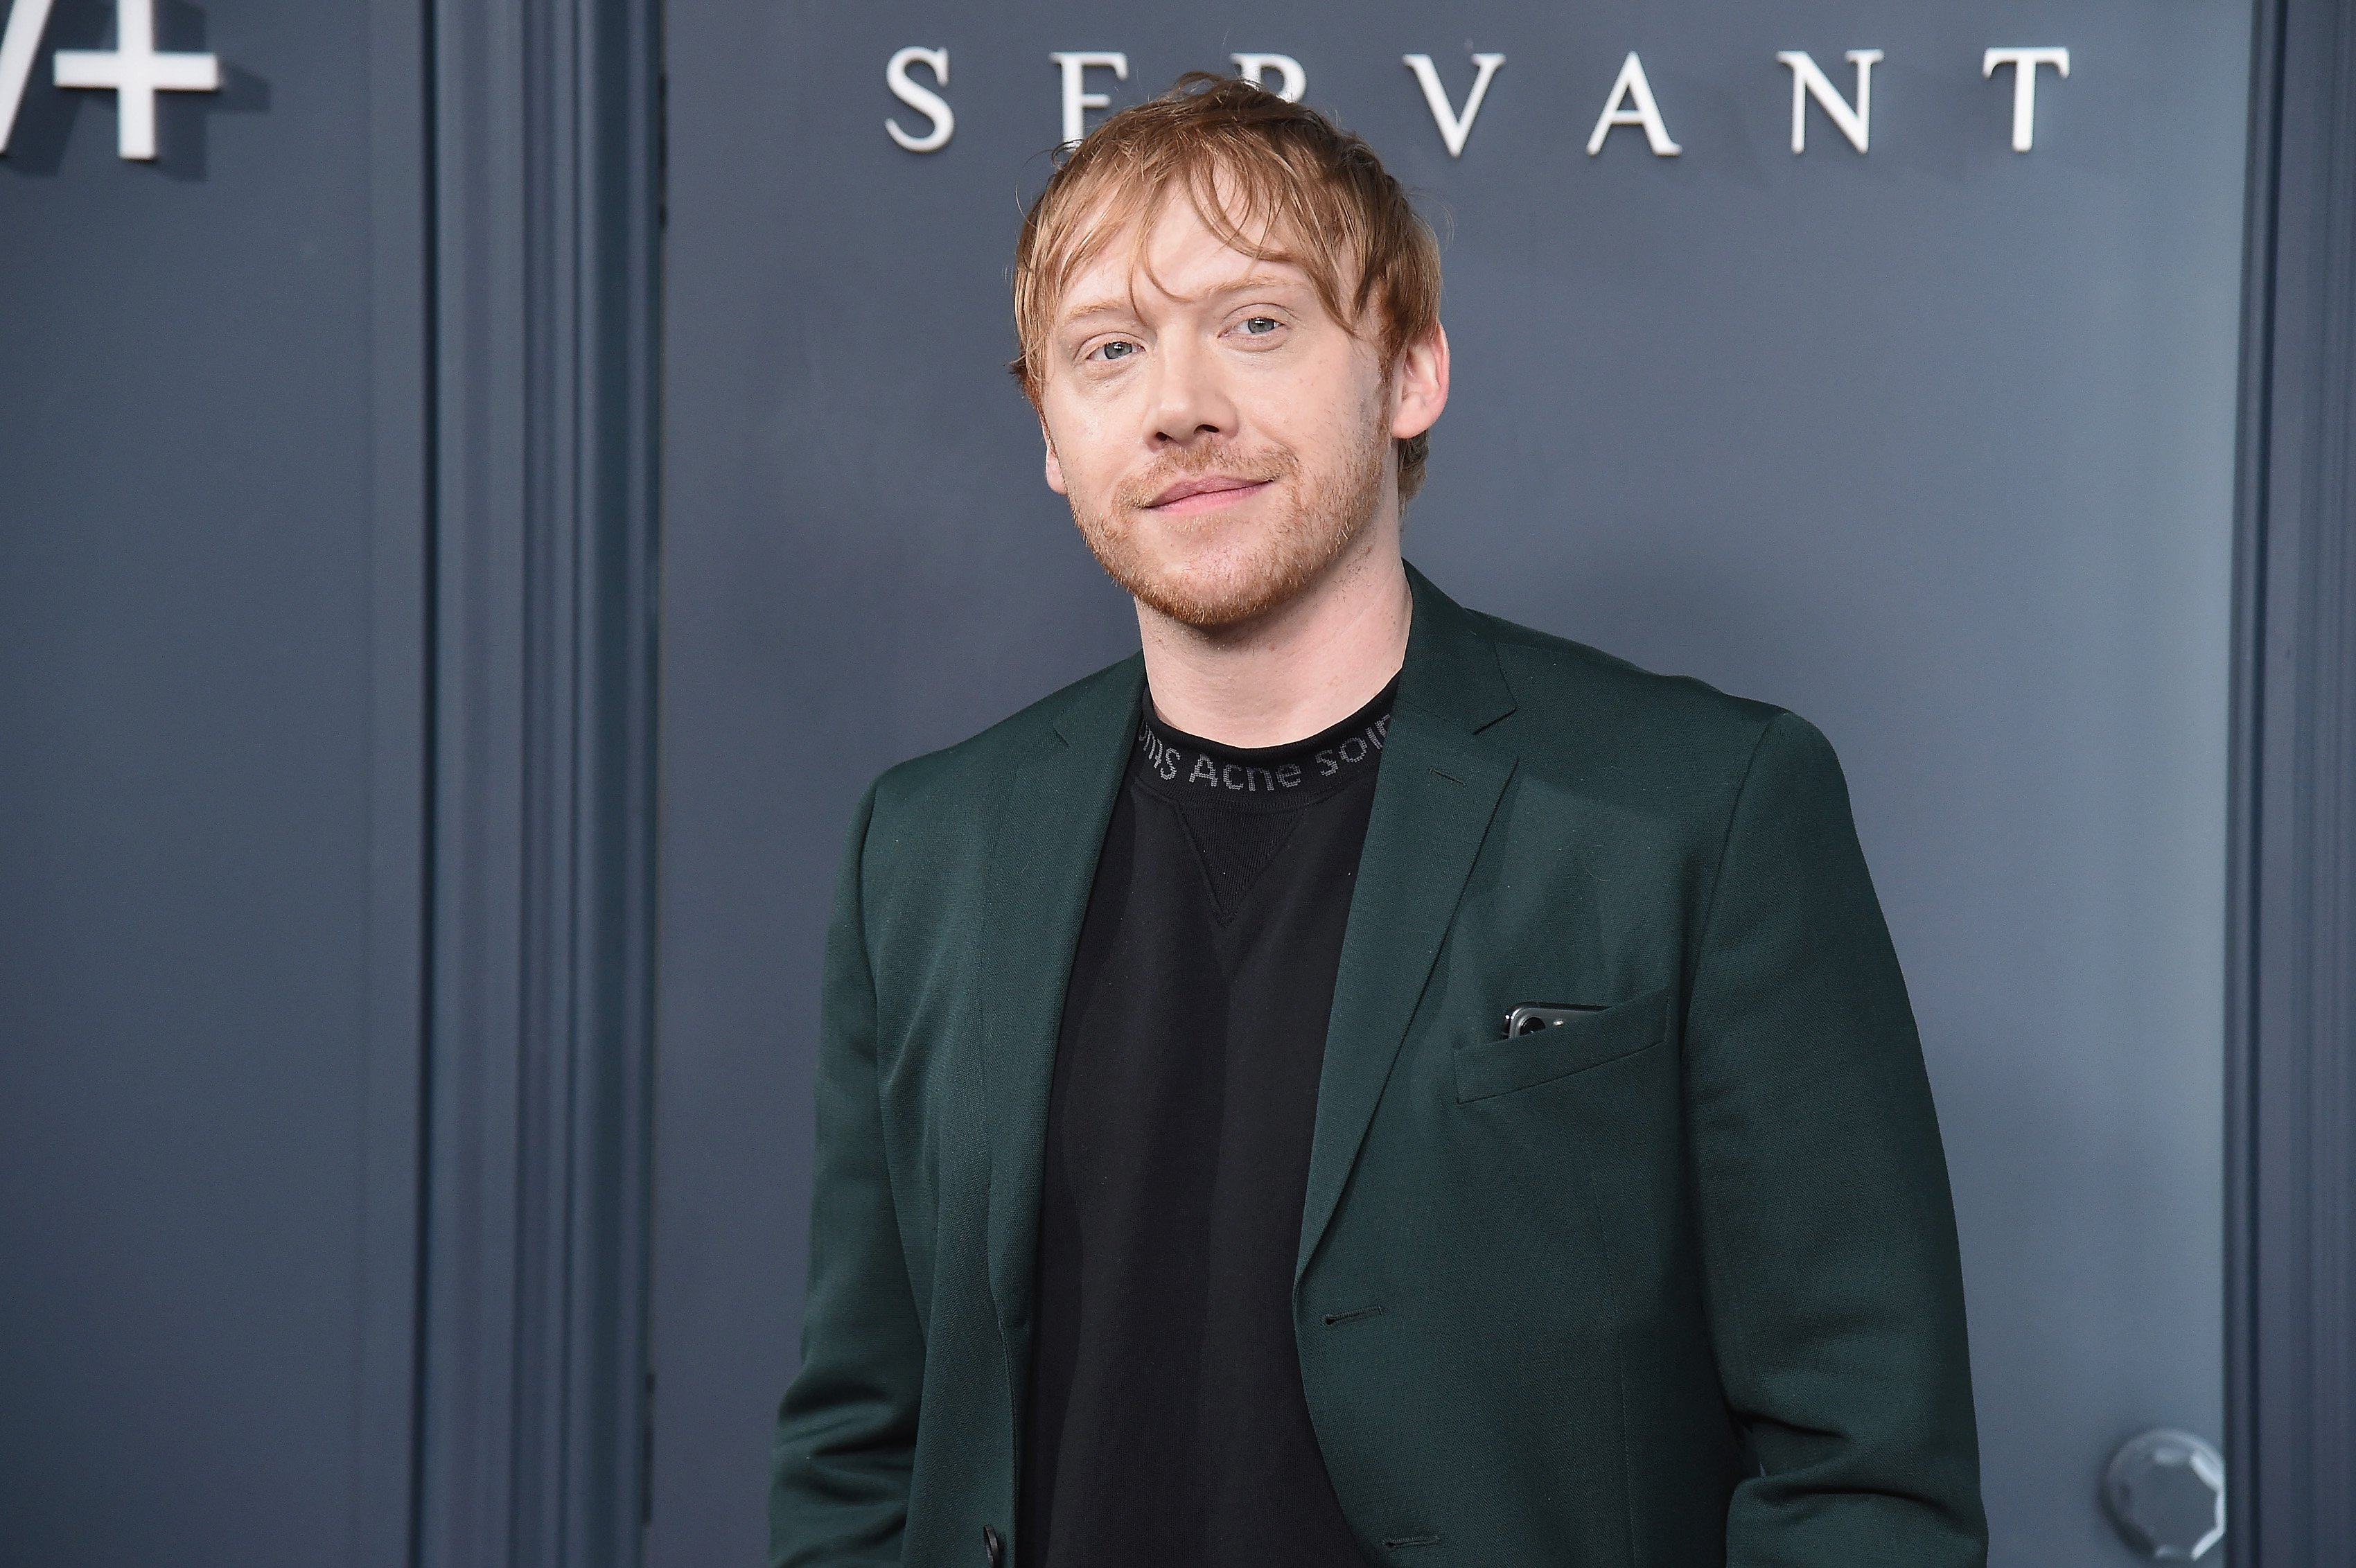 Rupert Grint at Apple TV+'s "Servant" World Premiere at BAM Howard Gilman Opera House in New York City | Photo: Gary Gershoff/WireImage